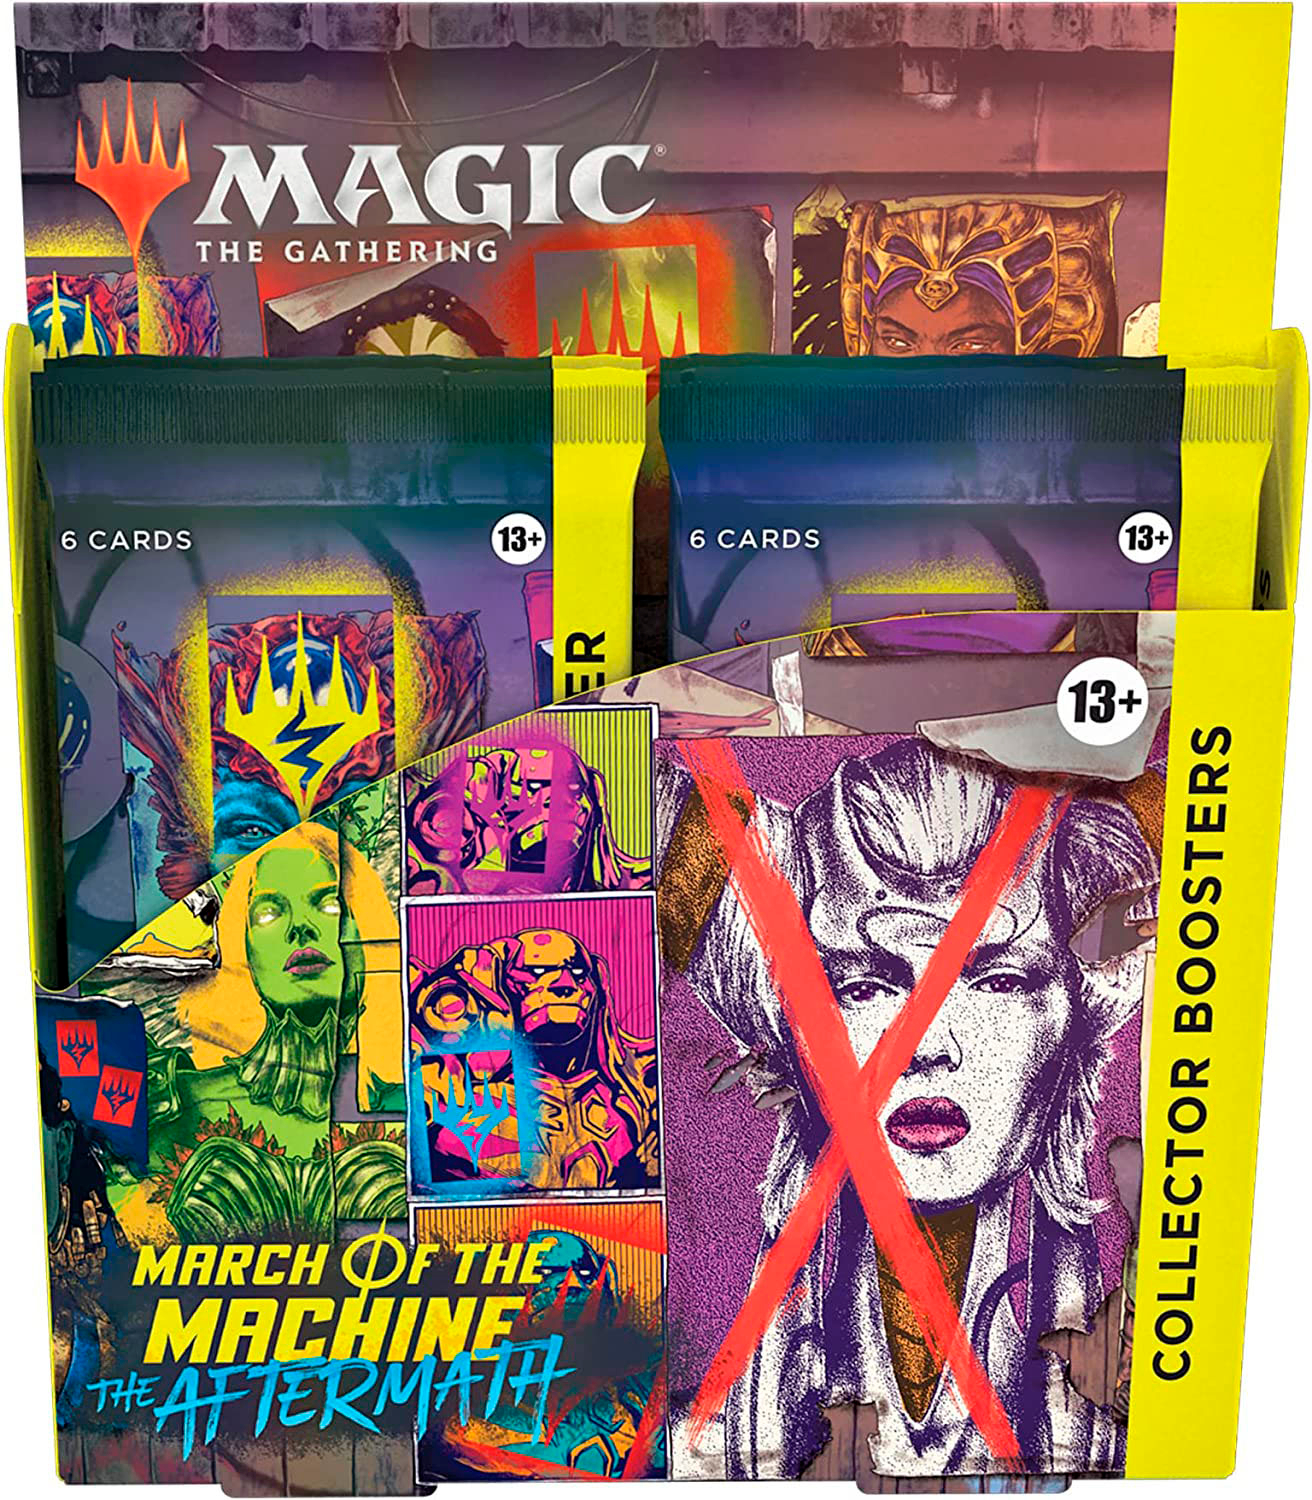 

Wizards of The Coast - Magic the Gathering March of the Machine The Aftermath Collector Booster Box